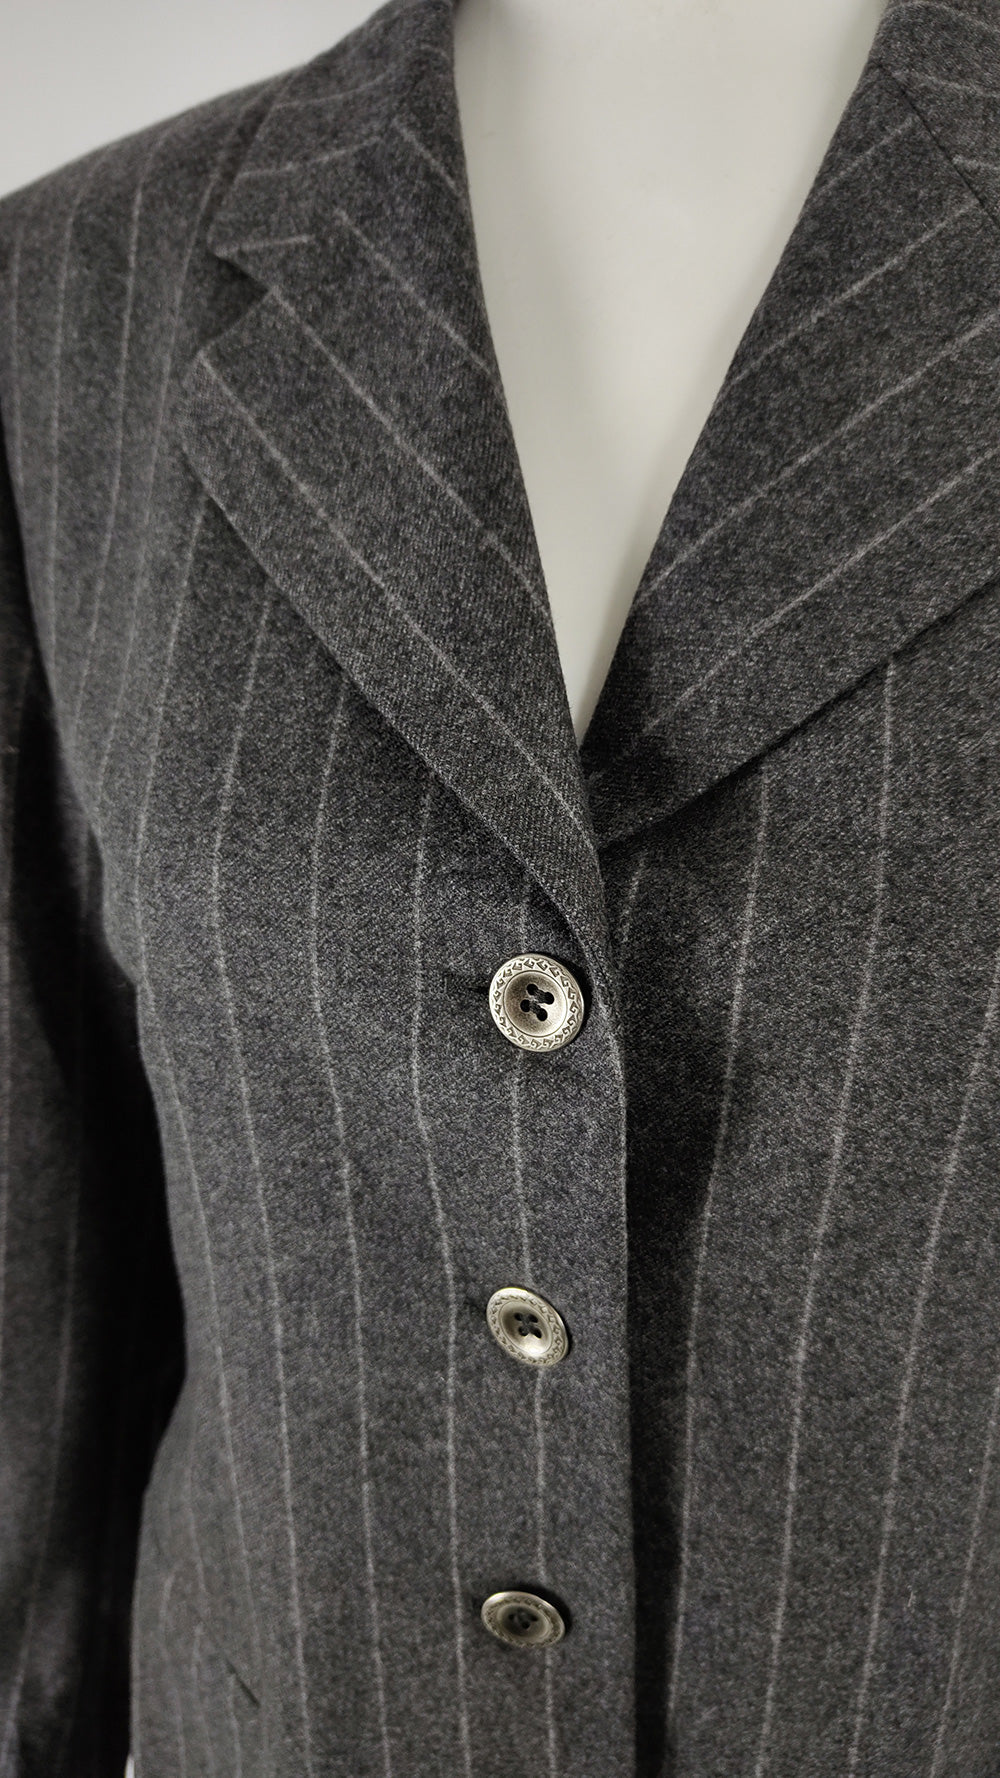 A grey womens vintage blazer from the 1990s with shoulder pads and a nipped waist.